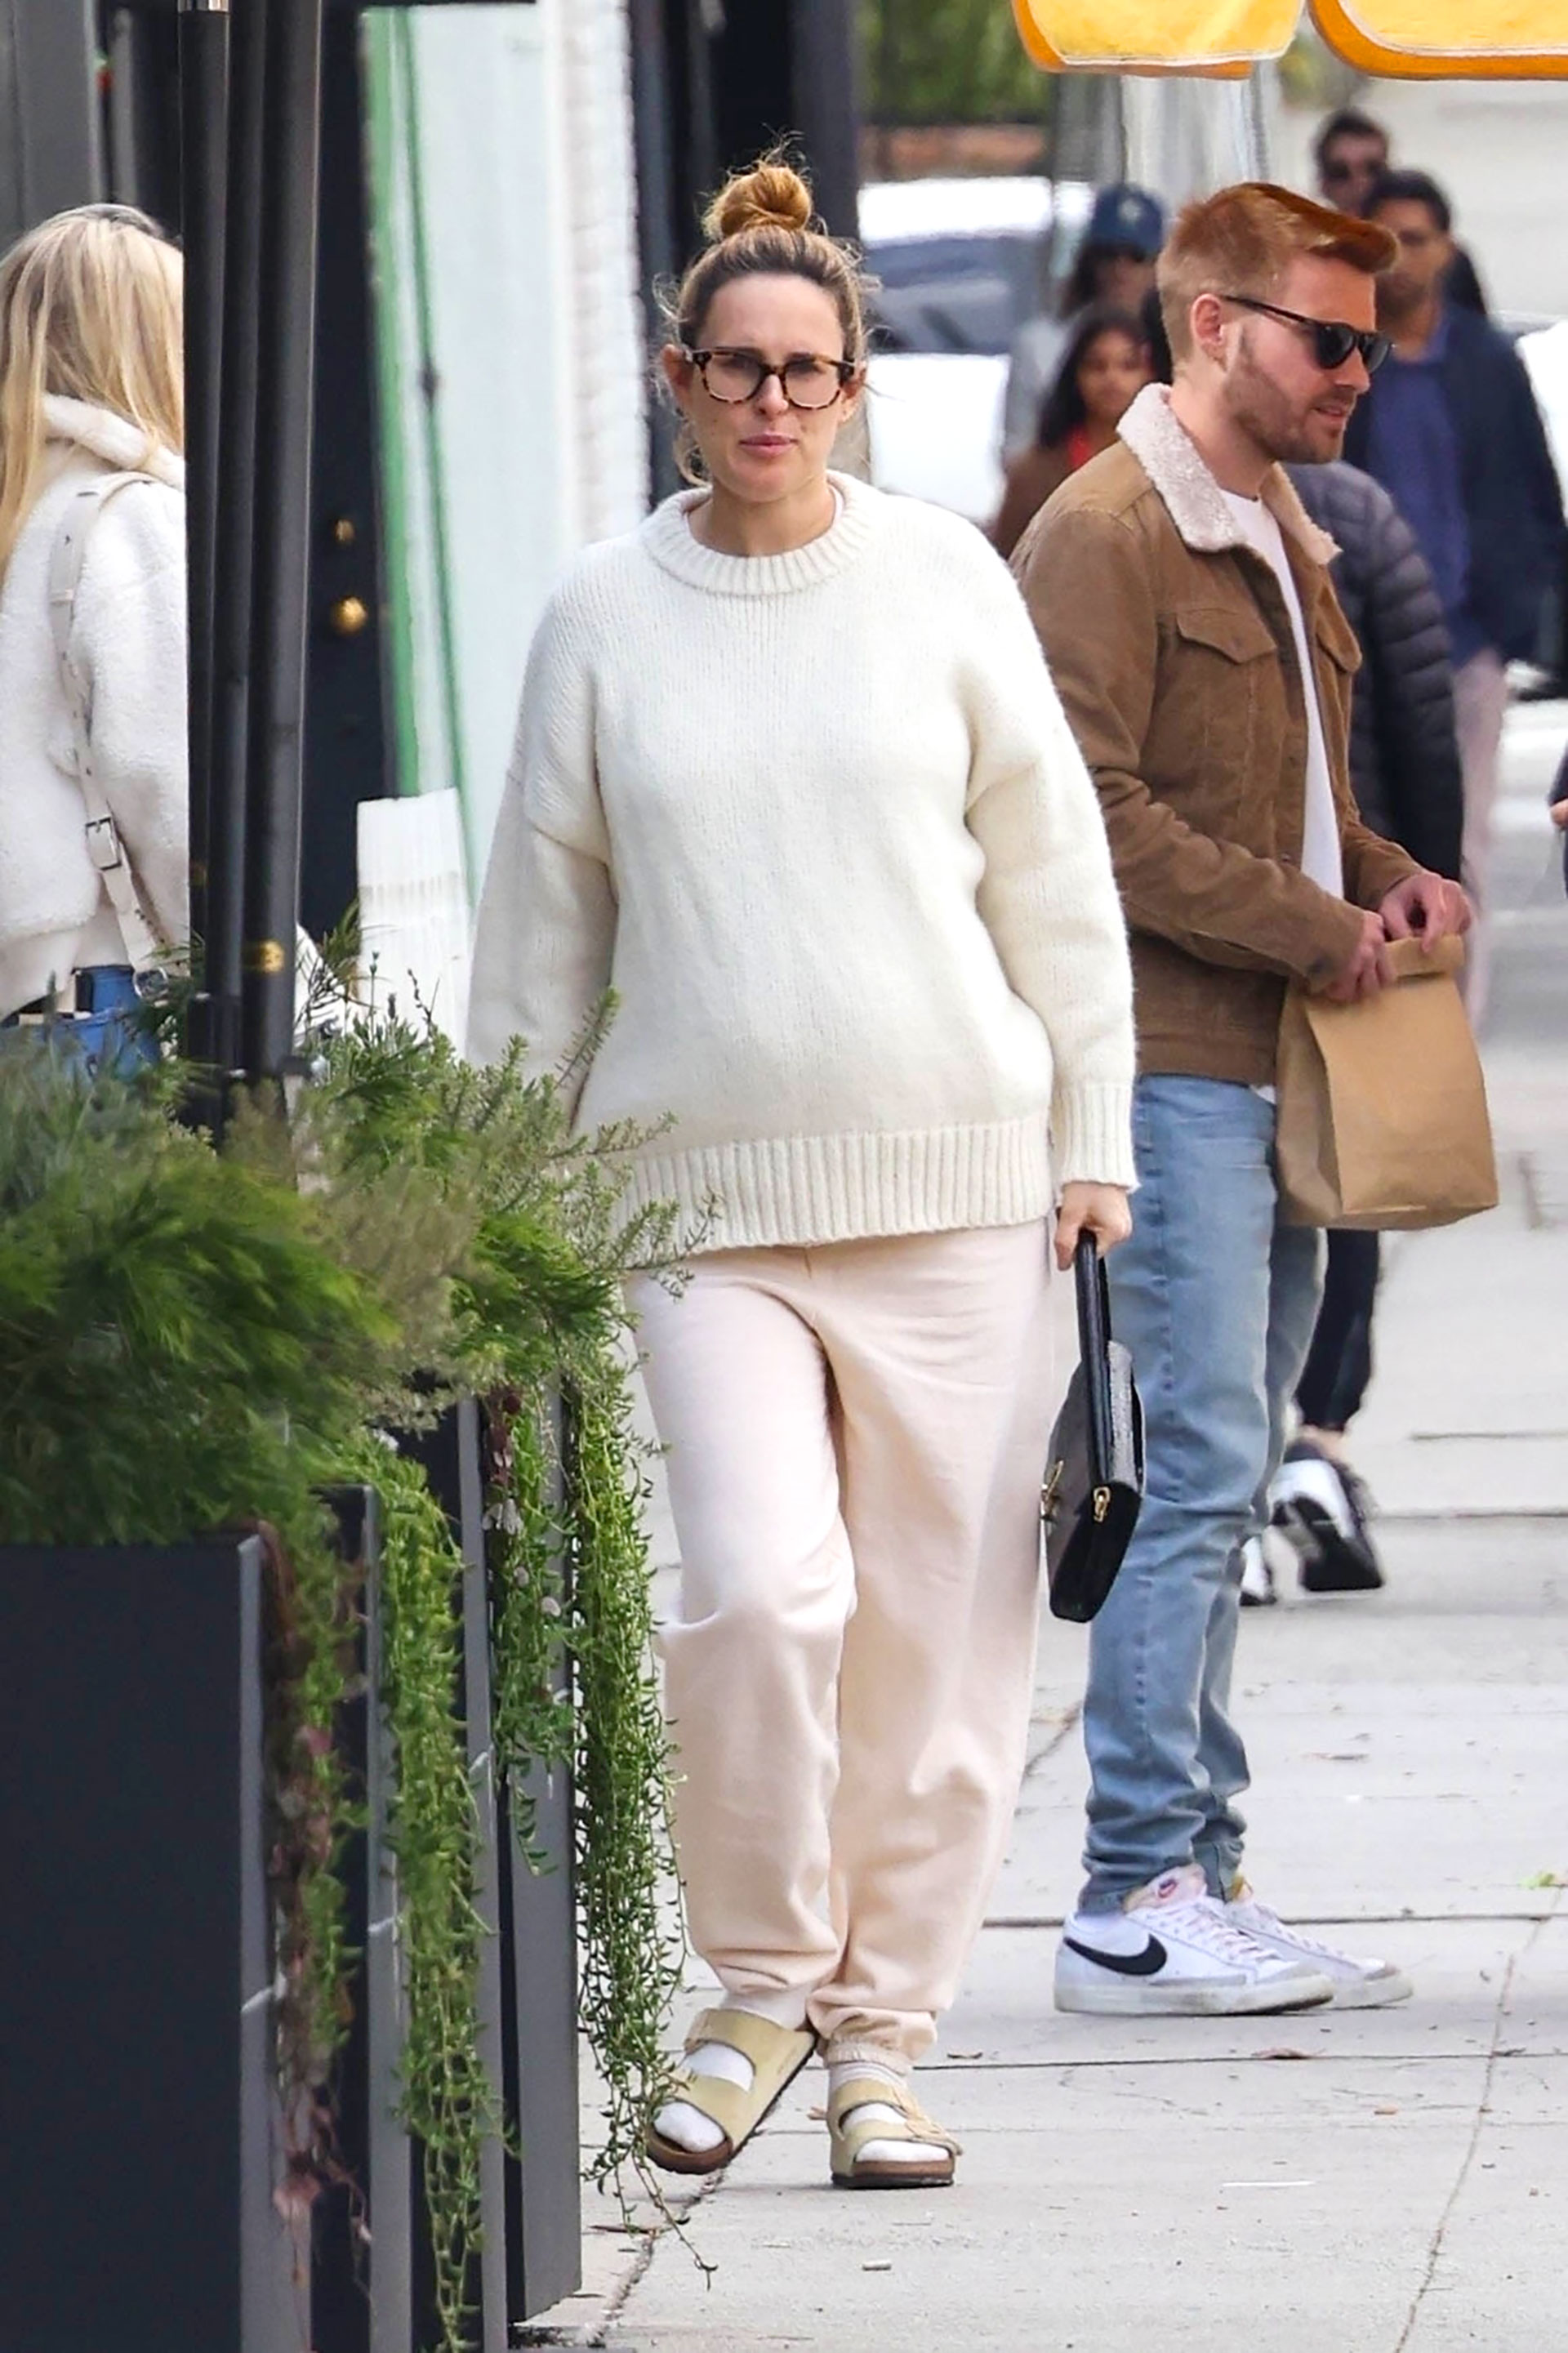 Rumer Willis toured a West Hollywood shopping mall.  He stopped for a coffee in a store, shopped, and kept walking.  She wore a white pants and sweater over her pregnant bump: she is expecting her first child with musician Derek Richard Thomas (Photos: The Grosby Group)